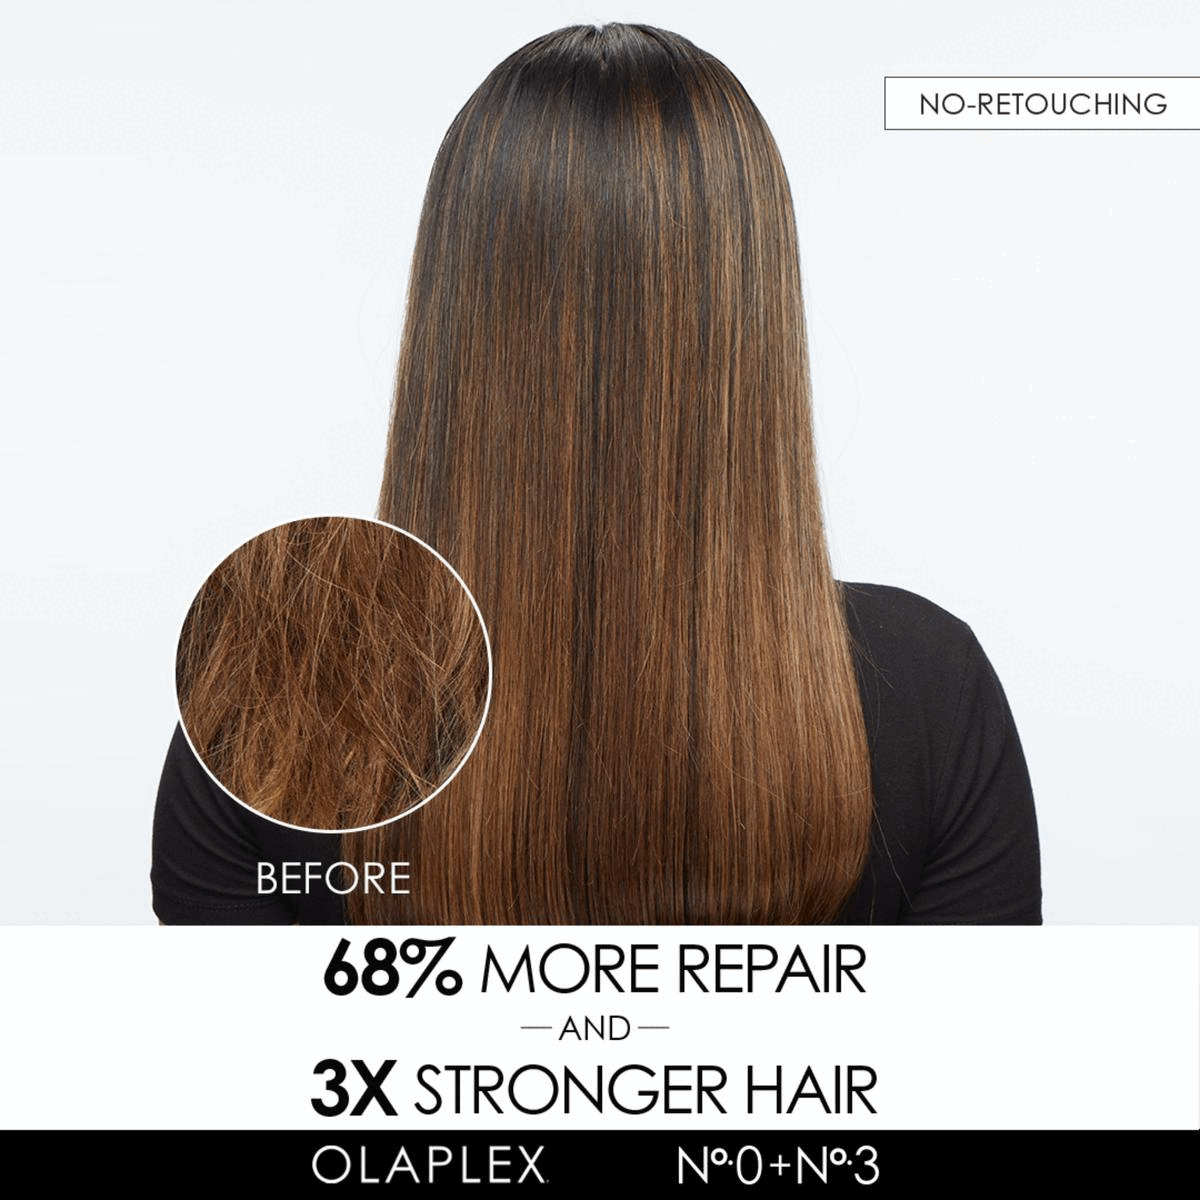 Image 1, 2 and 3, Before, No-Retouching 68% more repair and 3x stronger hair olaplex No0+No3. 